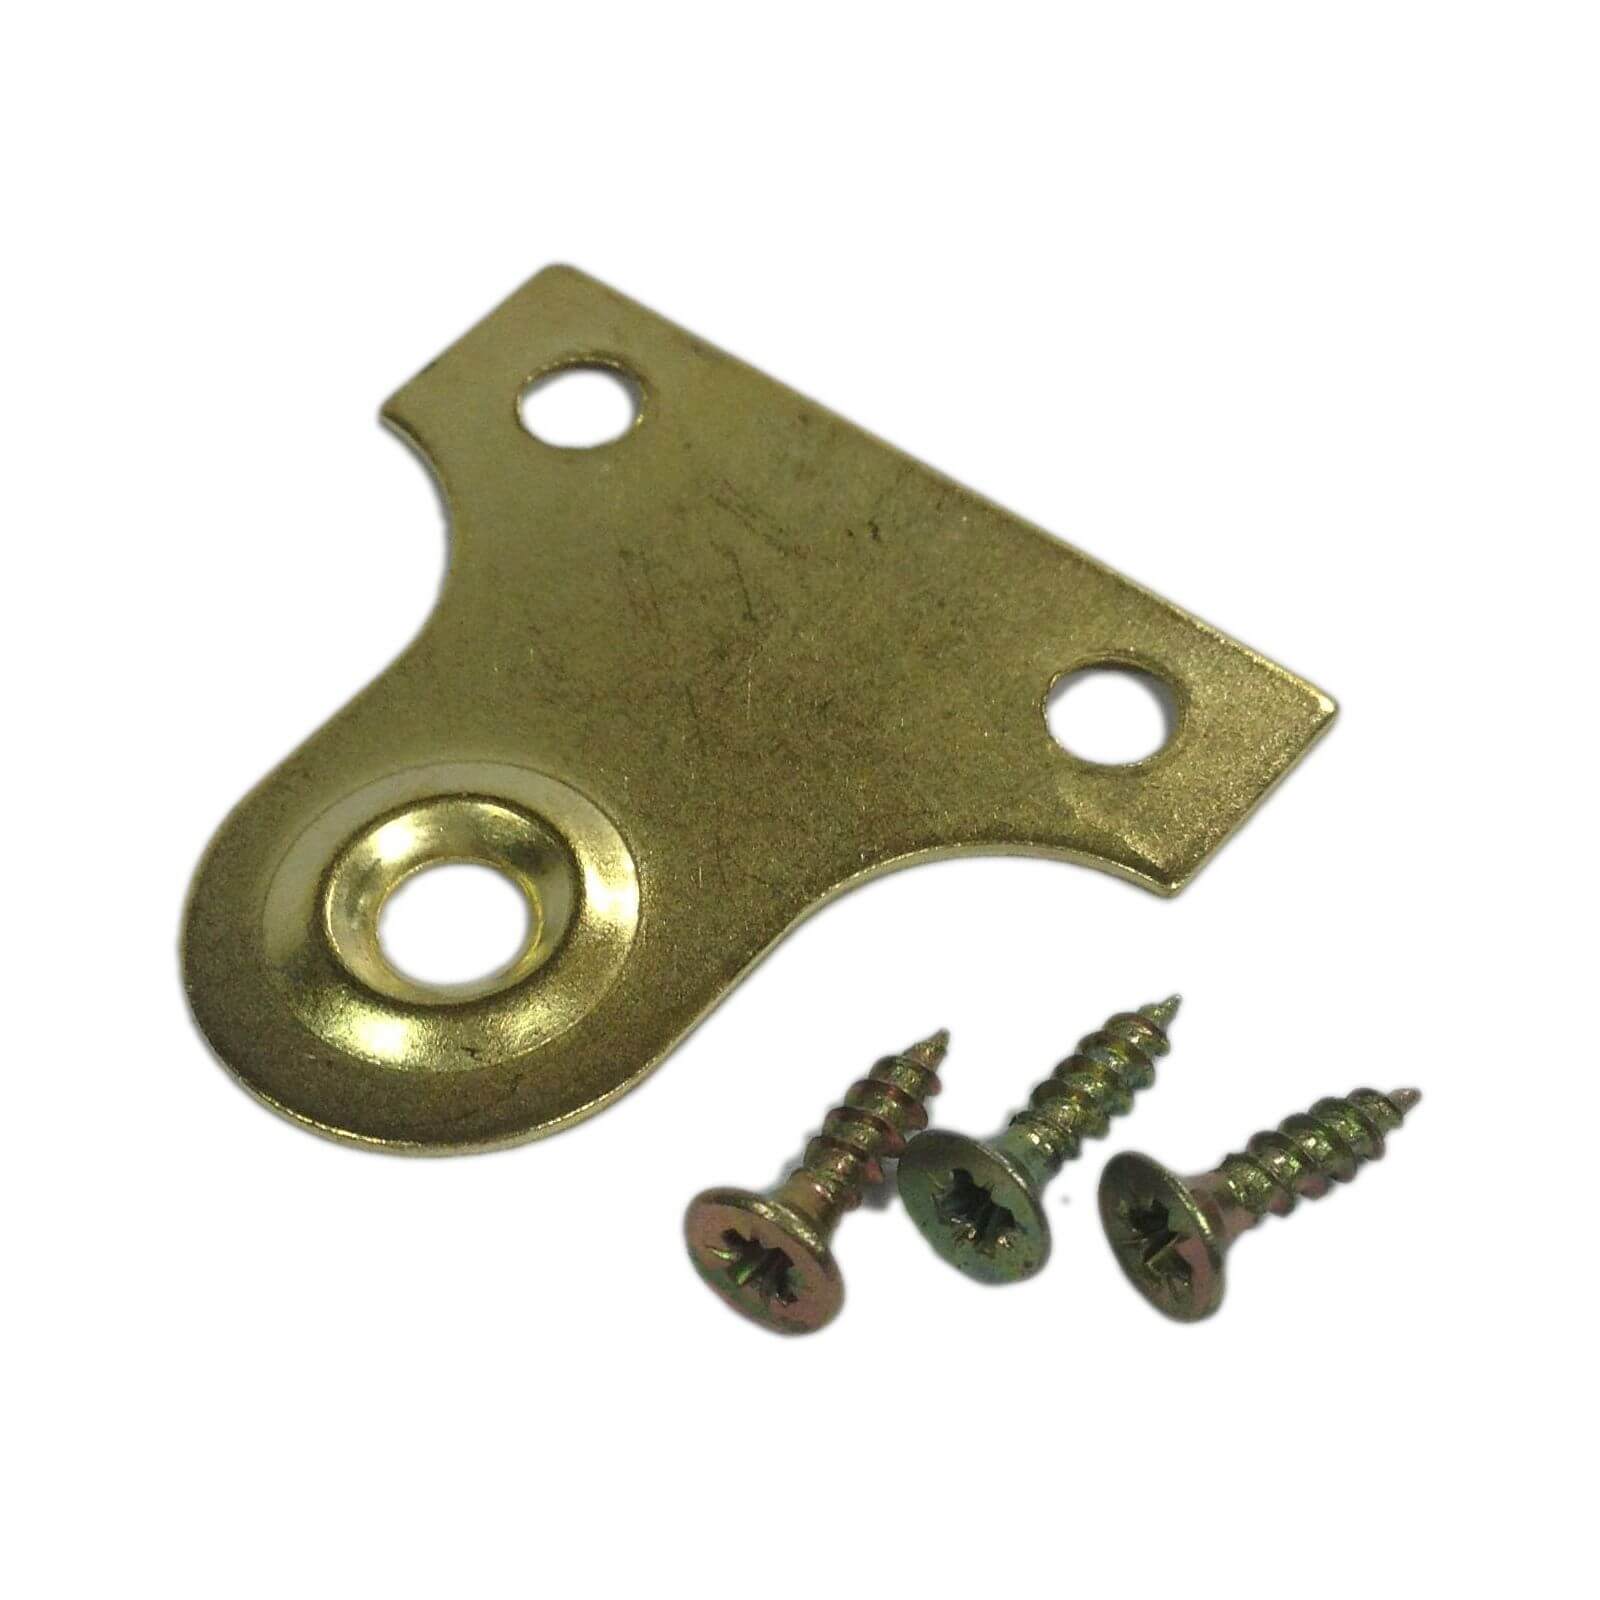 Brass Plate Picture Frame Bracket - 25mm - 2 Pack